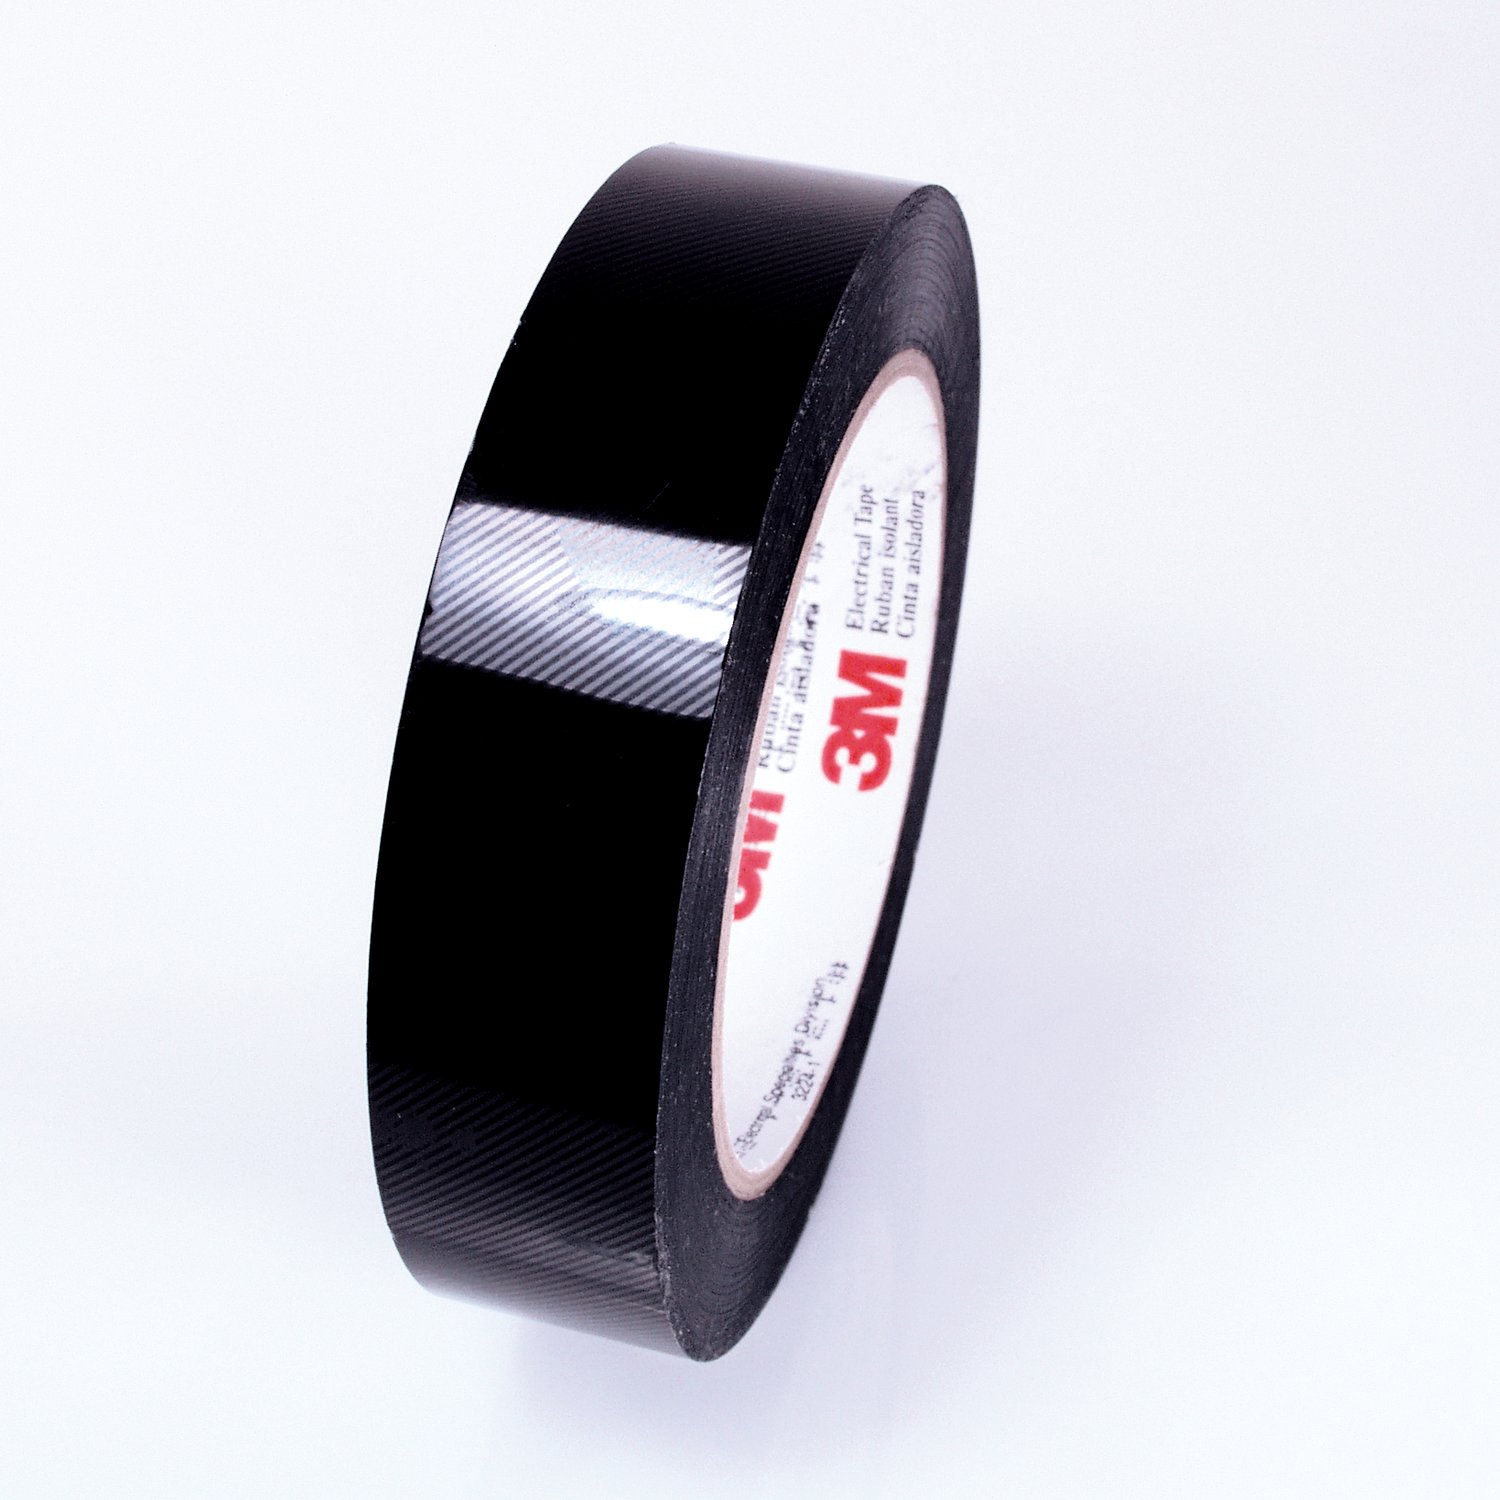 7010401264 - 3M Polyester Film Electrical Tape 1350F-1, Black, 2 in x 72 yd, RAZOR
SLIT ONLY, 3-in plastic, 24 Rolls/Case